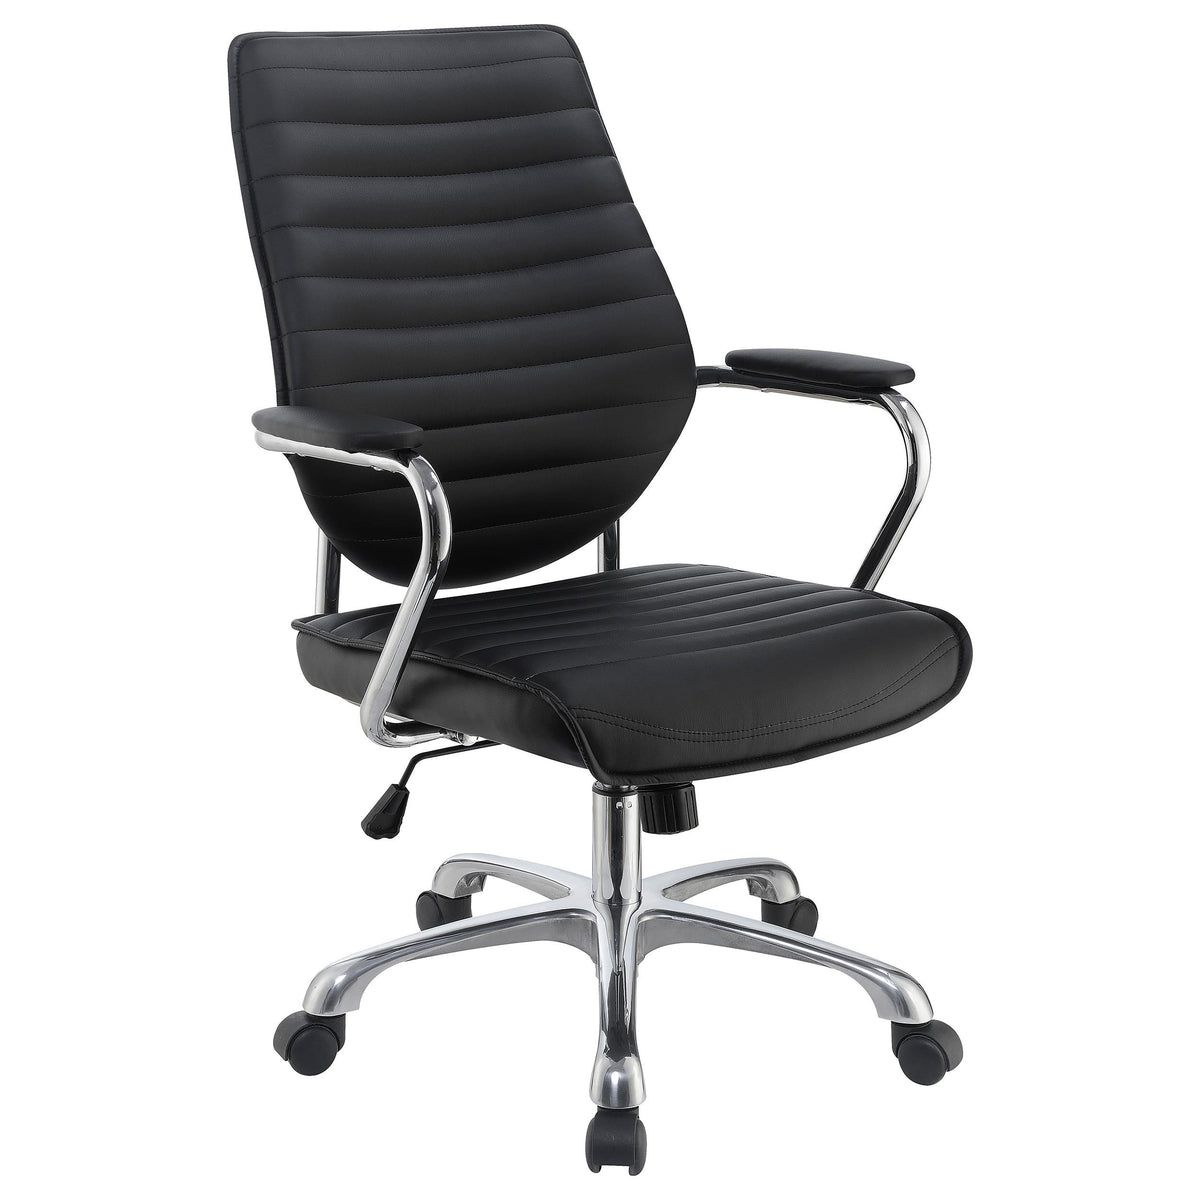 Chase High Back Office Chair Black and Chrome  Half Price Furniture